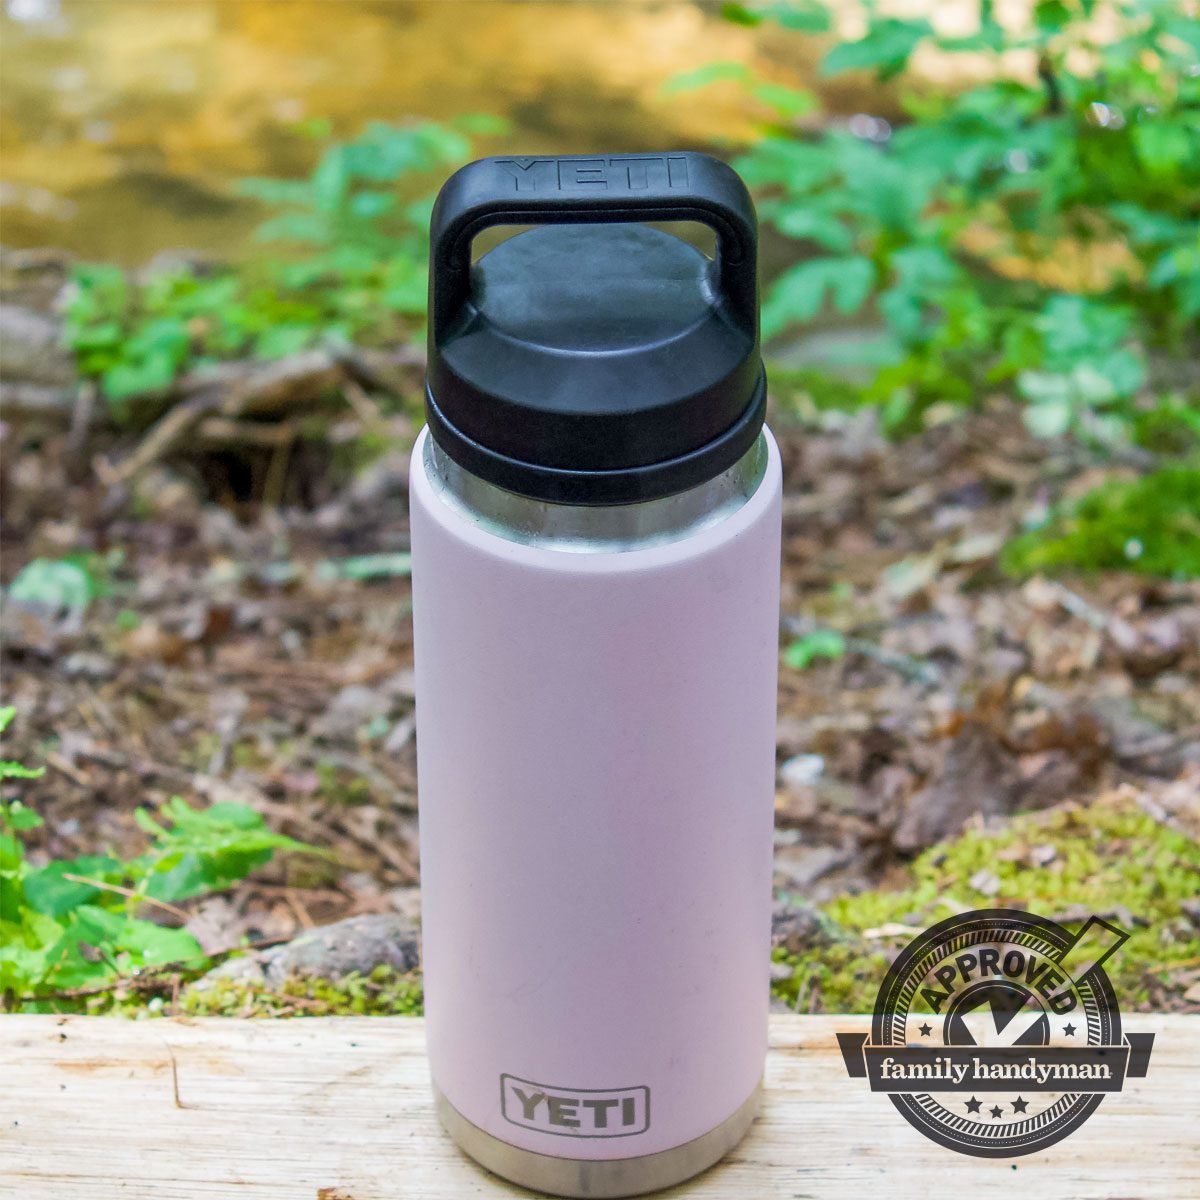 5 Top-Rated YETI Products